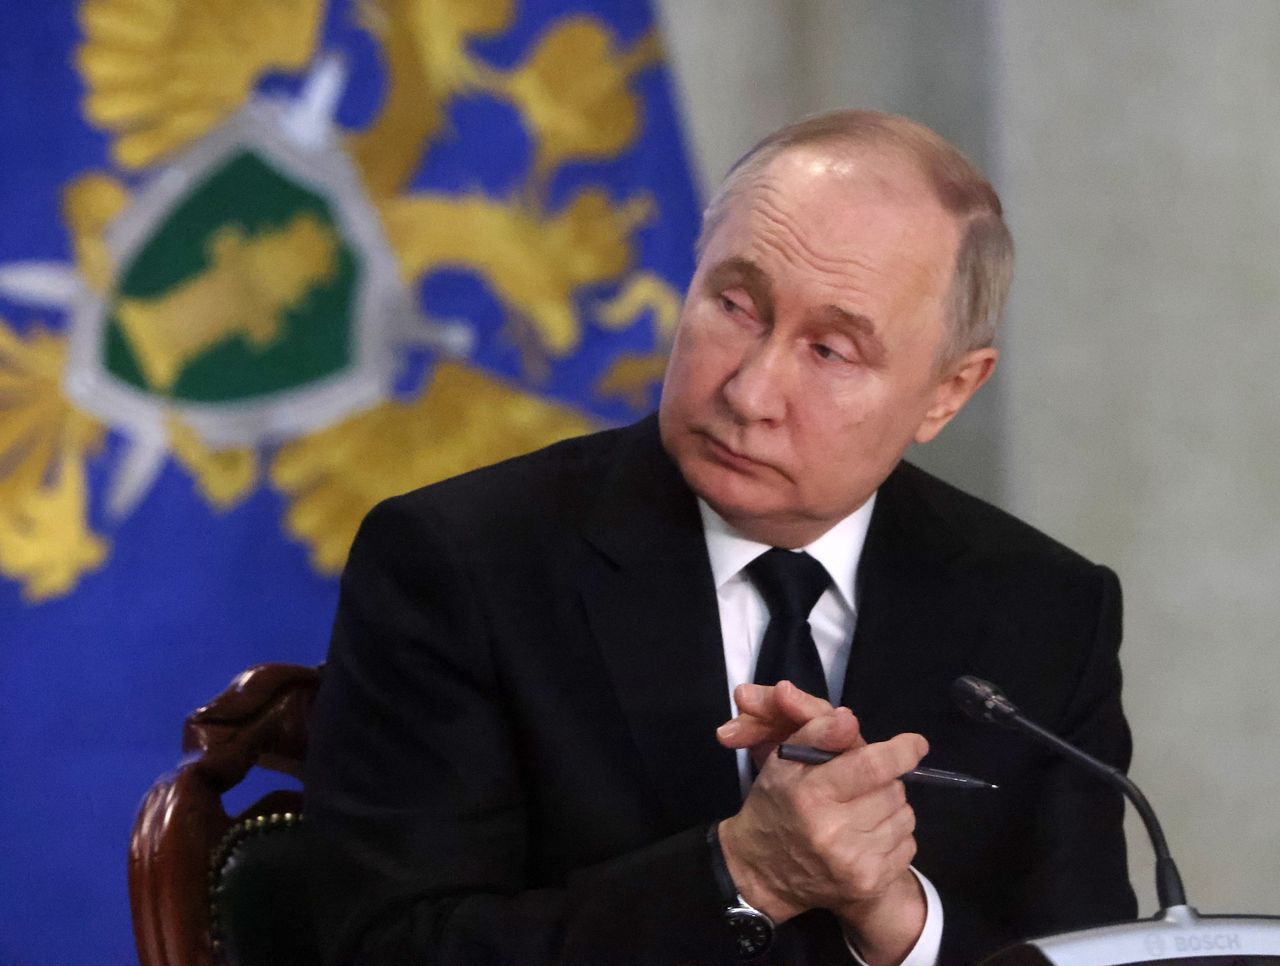 Vladimir Putin's plans have been revealed. Will he respond to the ISIS attack?